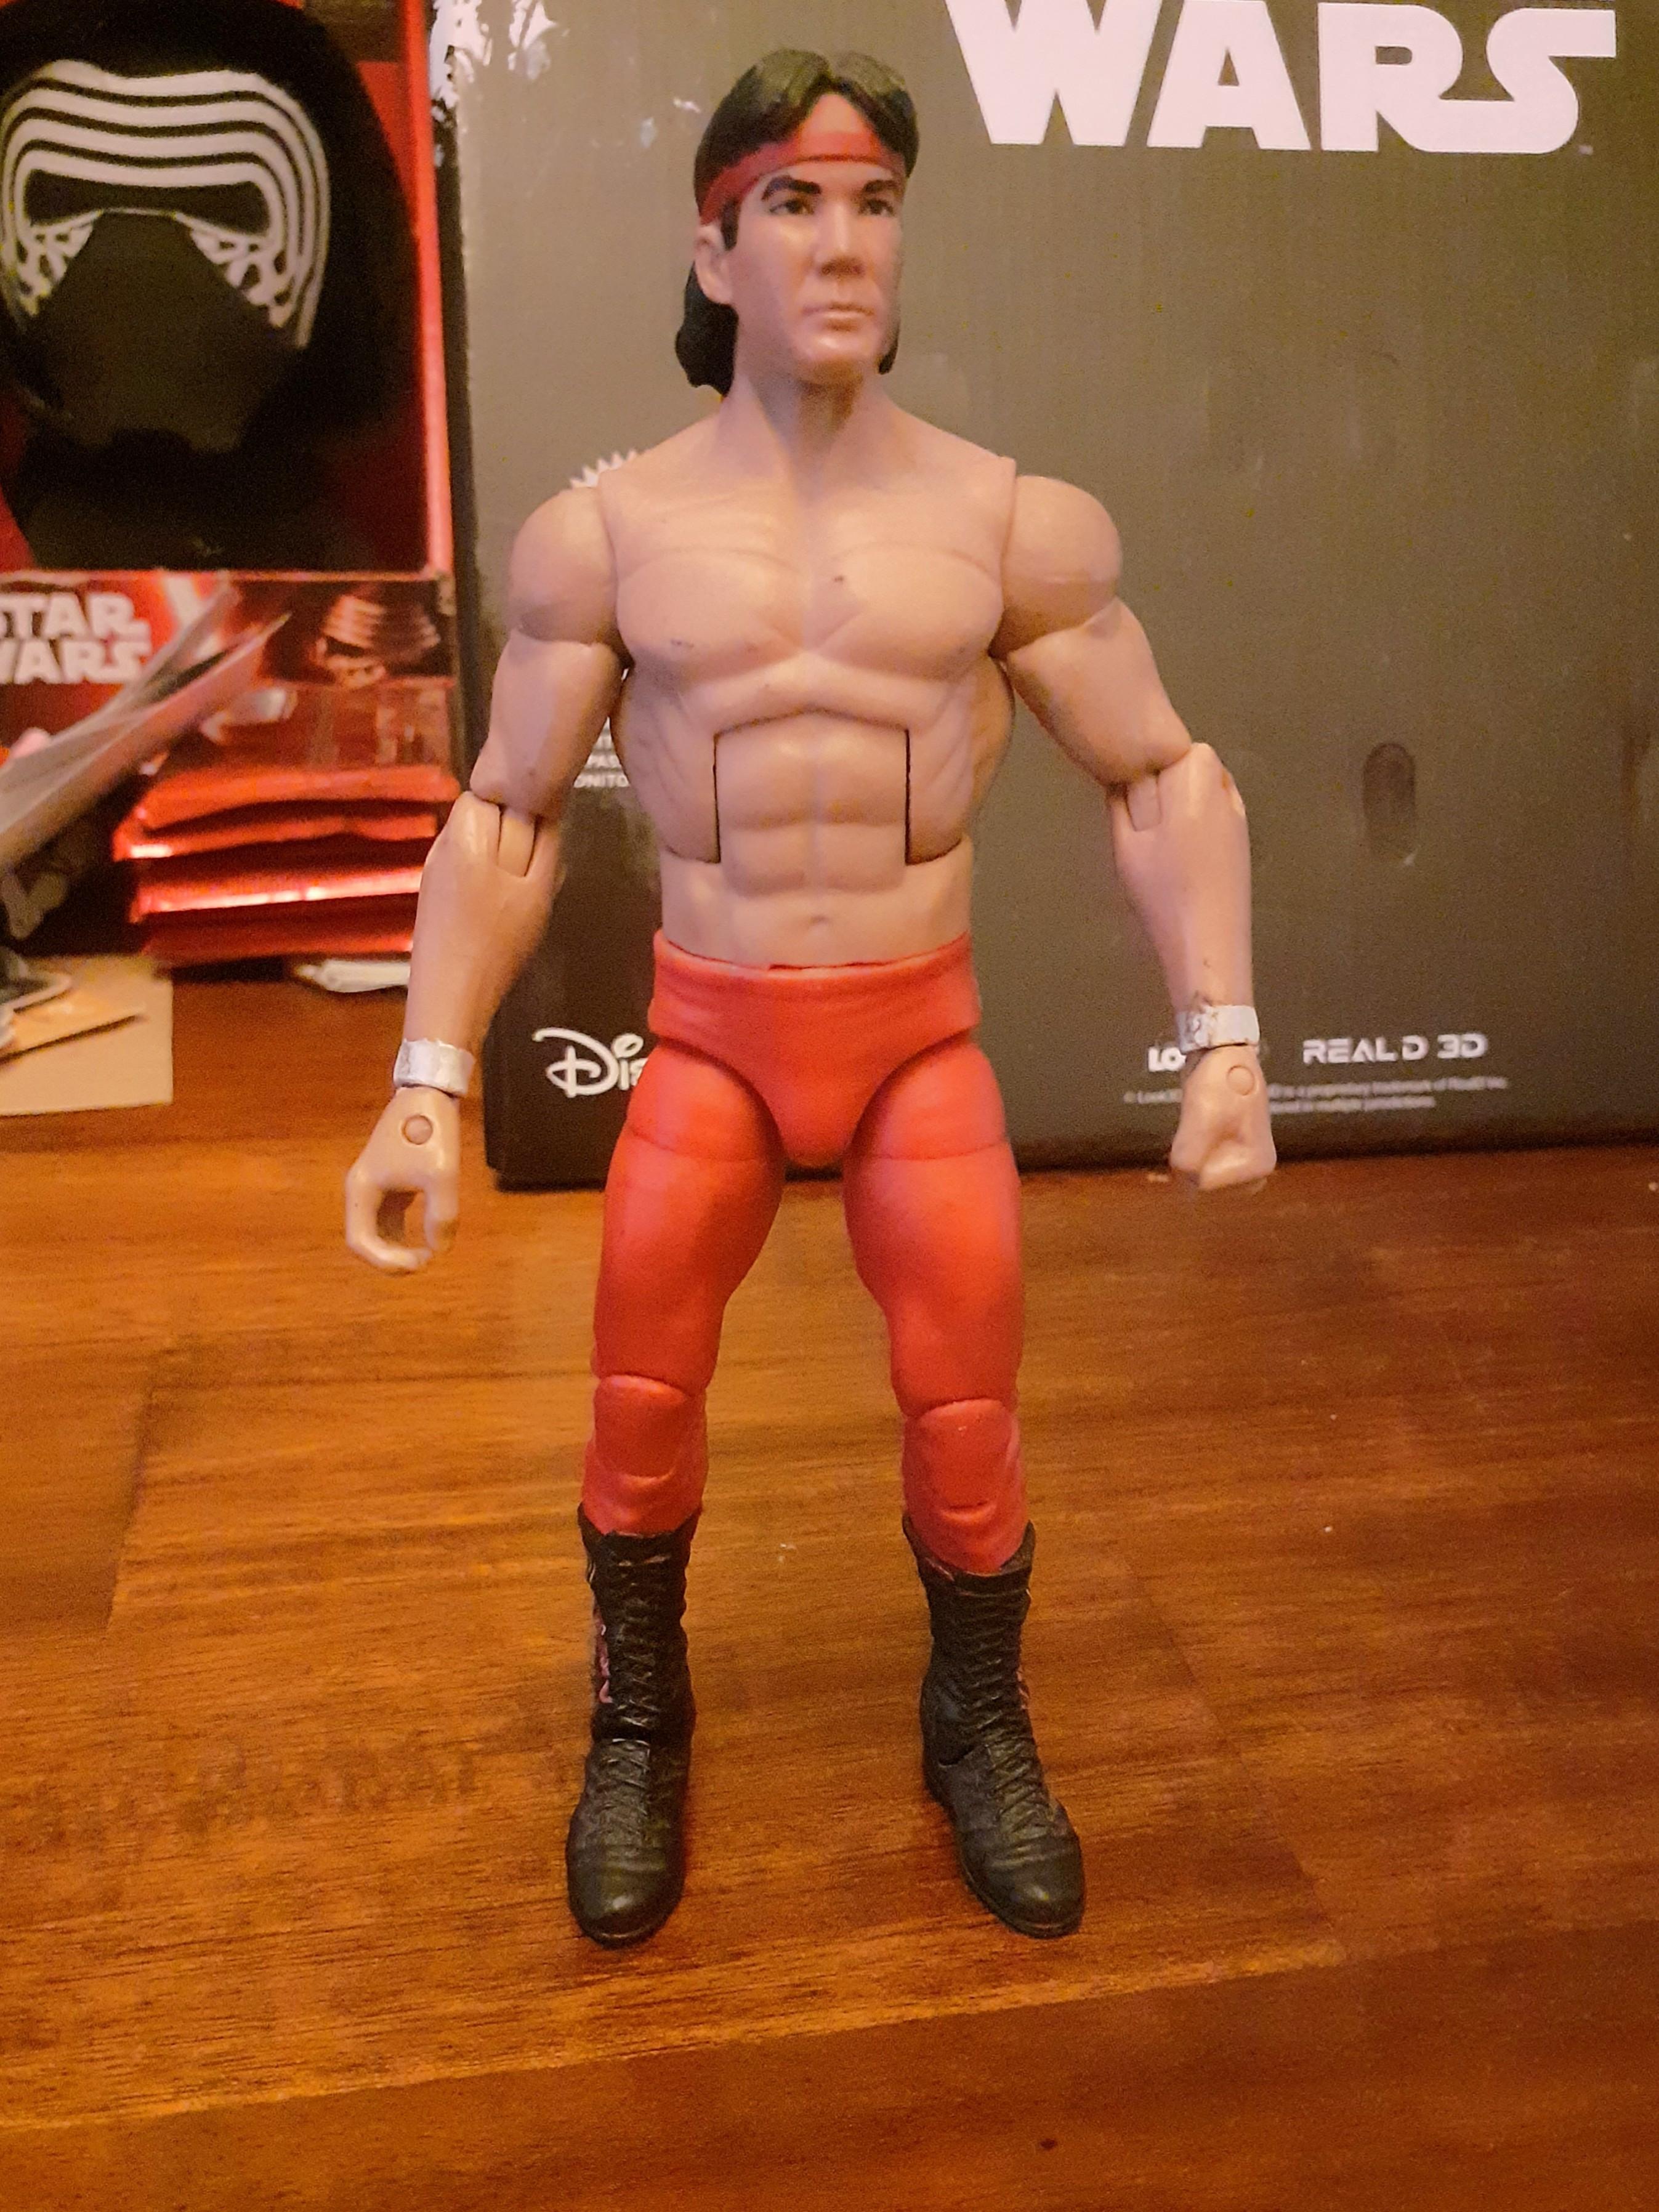 ricky the dragon steamboat action figure